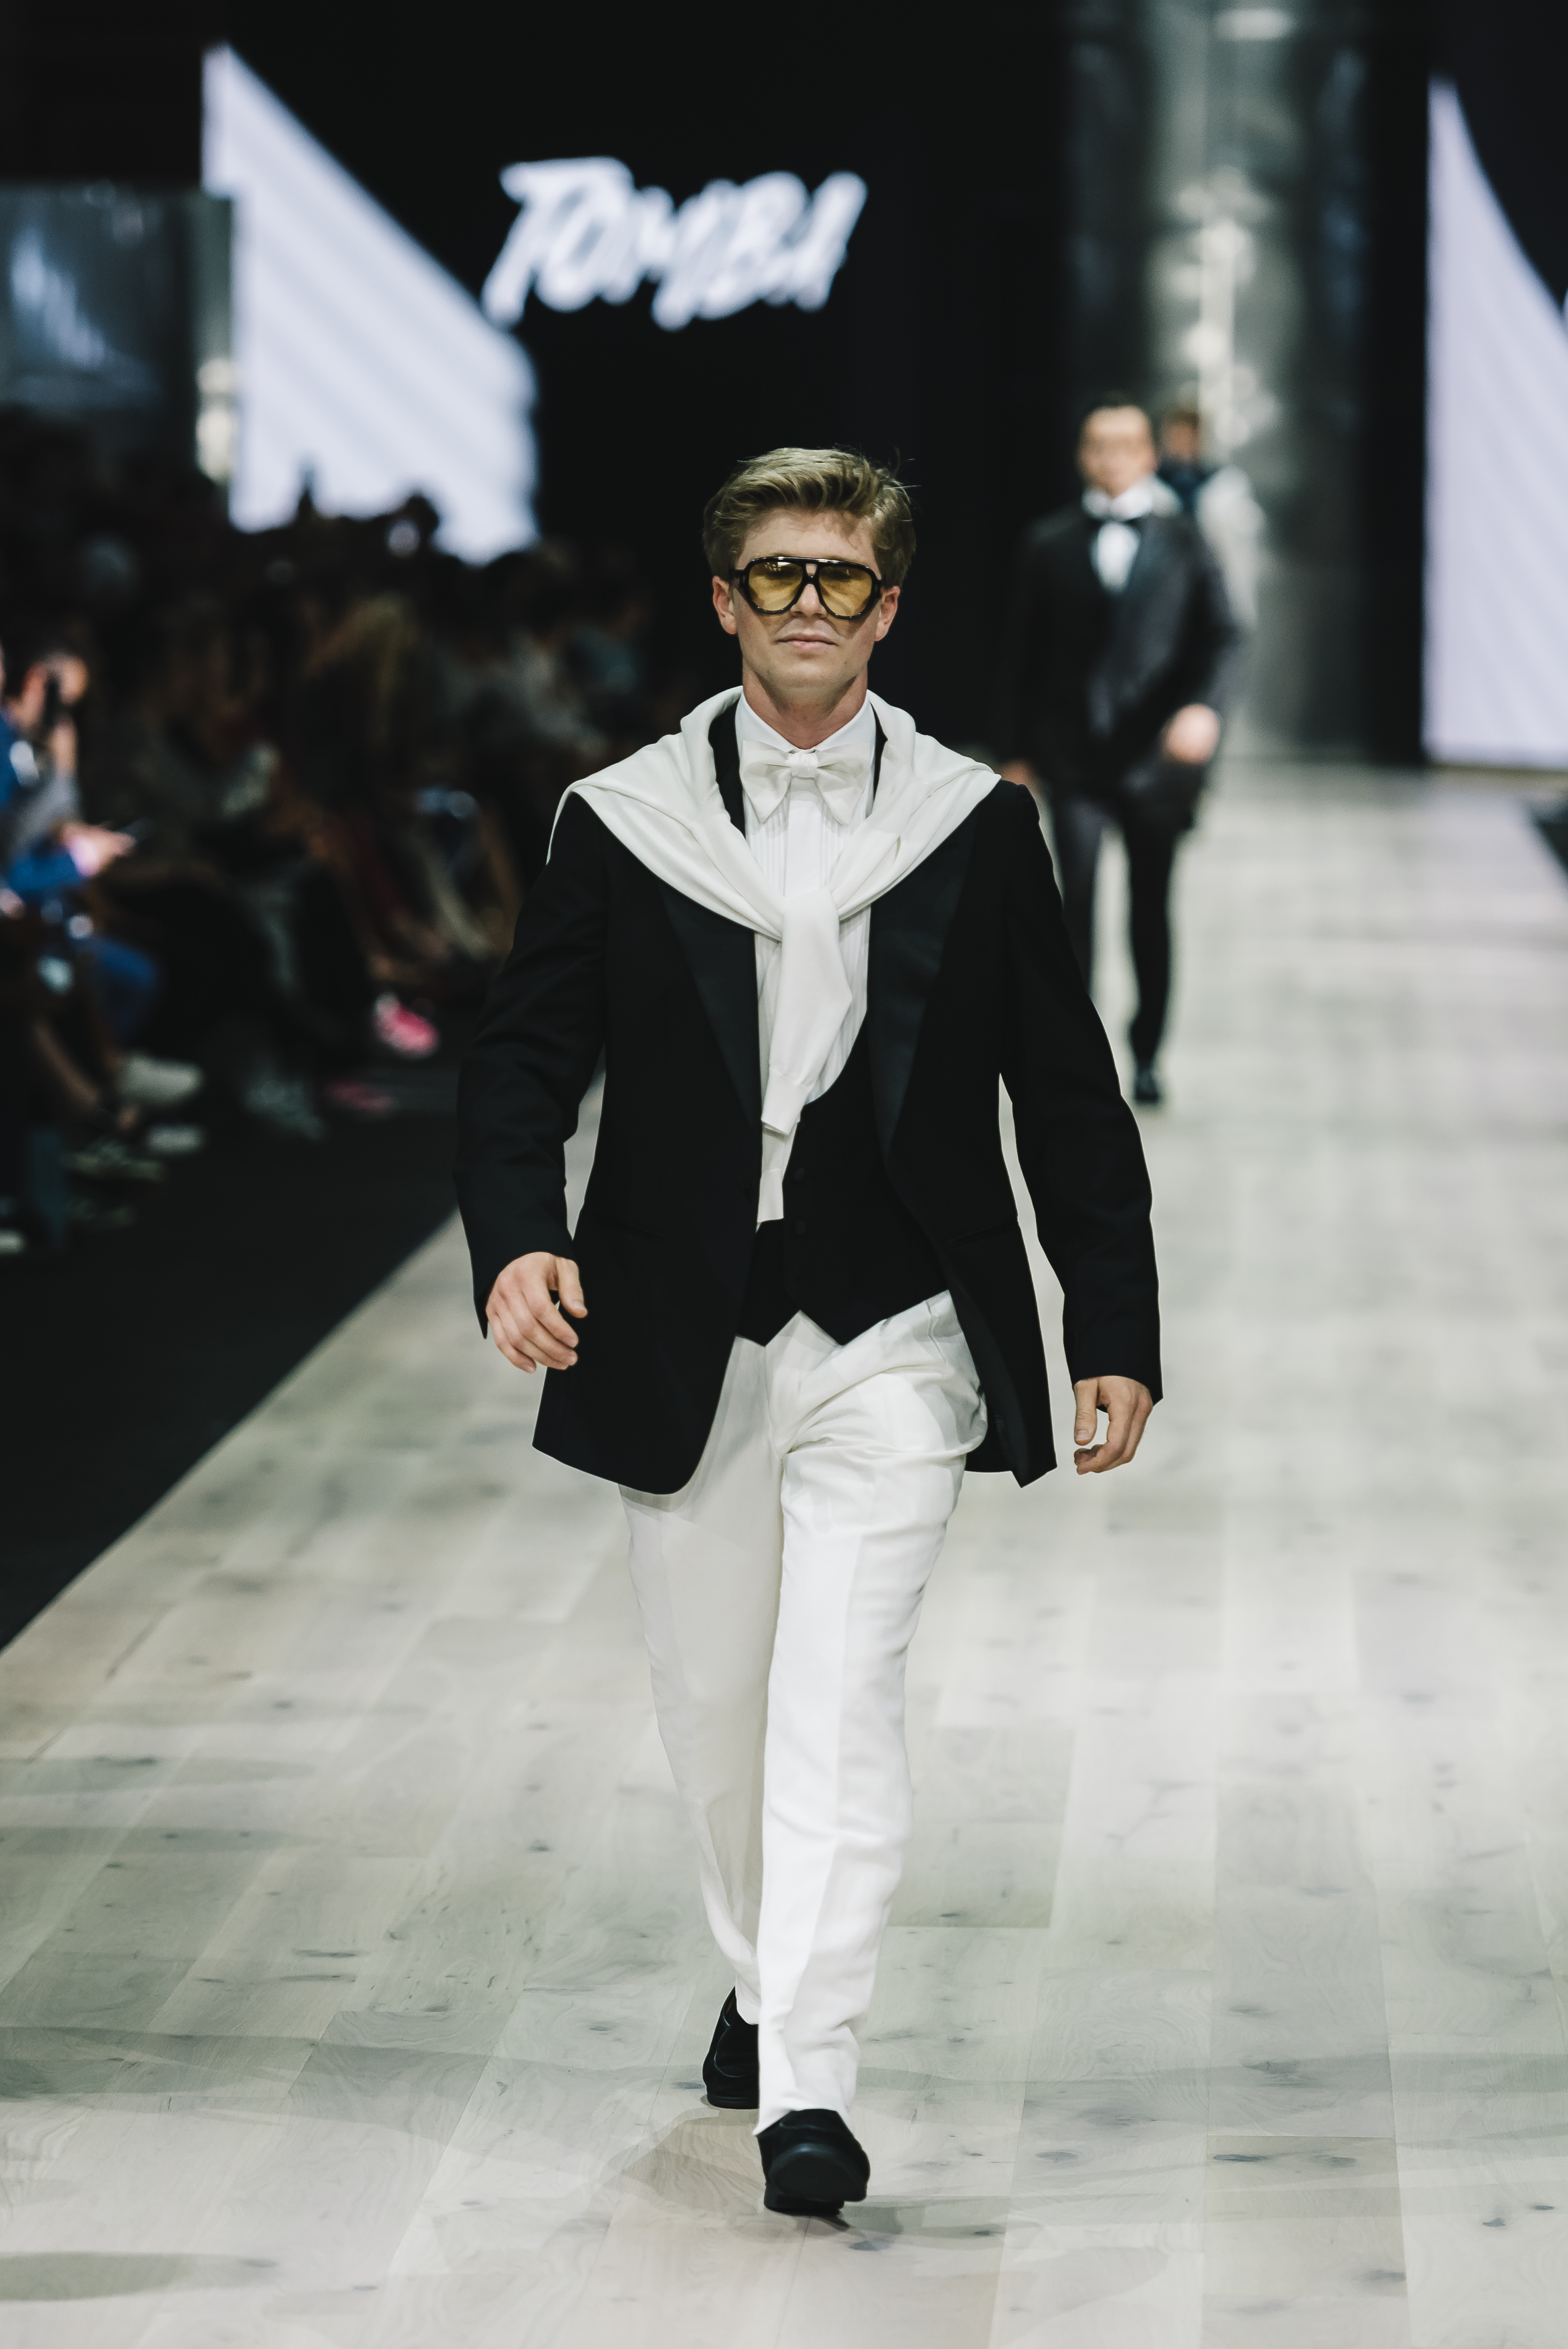 Robert Irwin at the Melbourne Fashion Festival in Melbourne, Australia on March 6, 2024 | Source: Getty Images